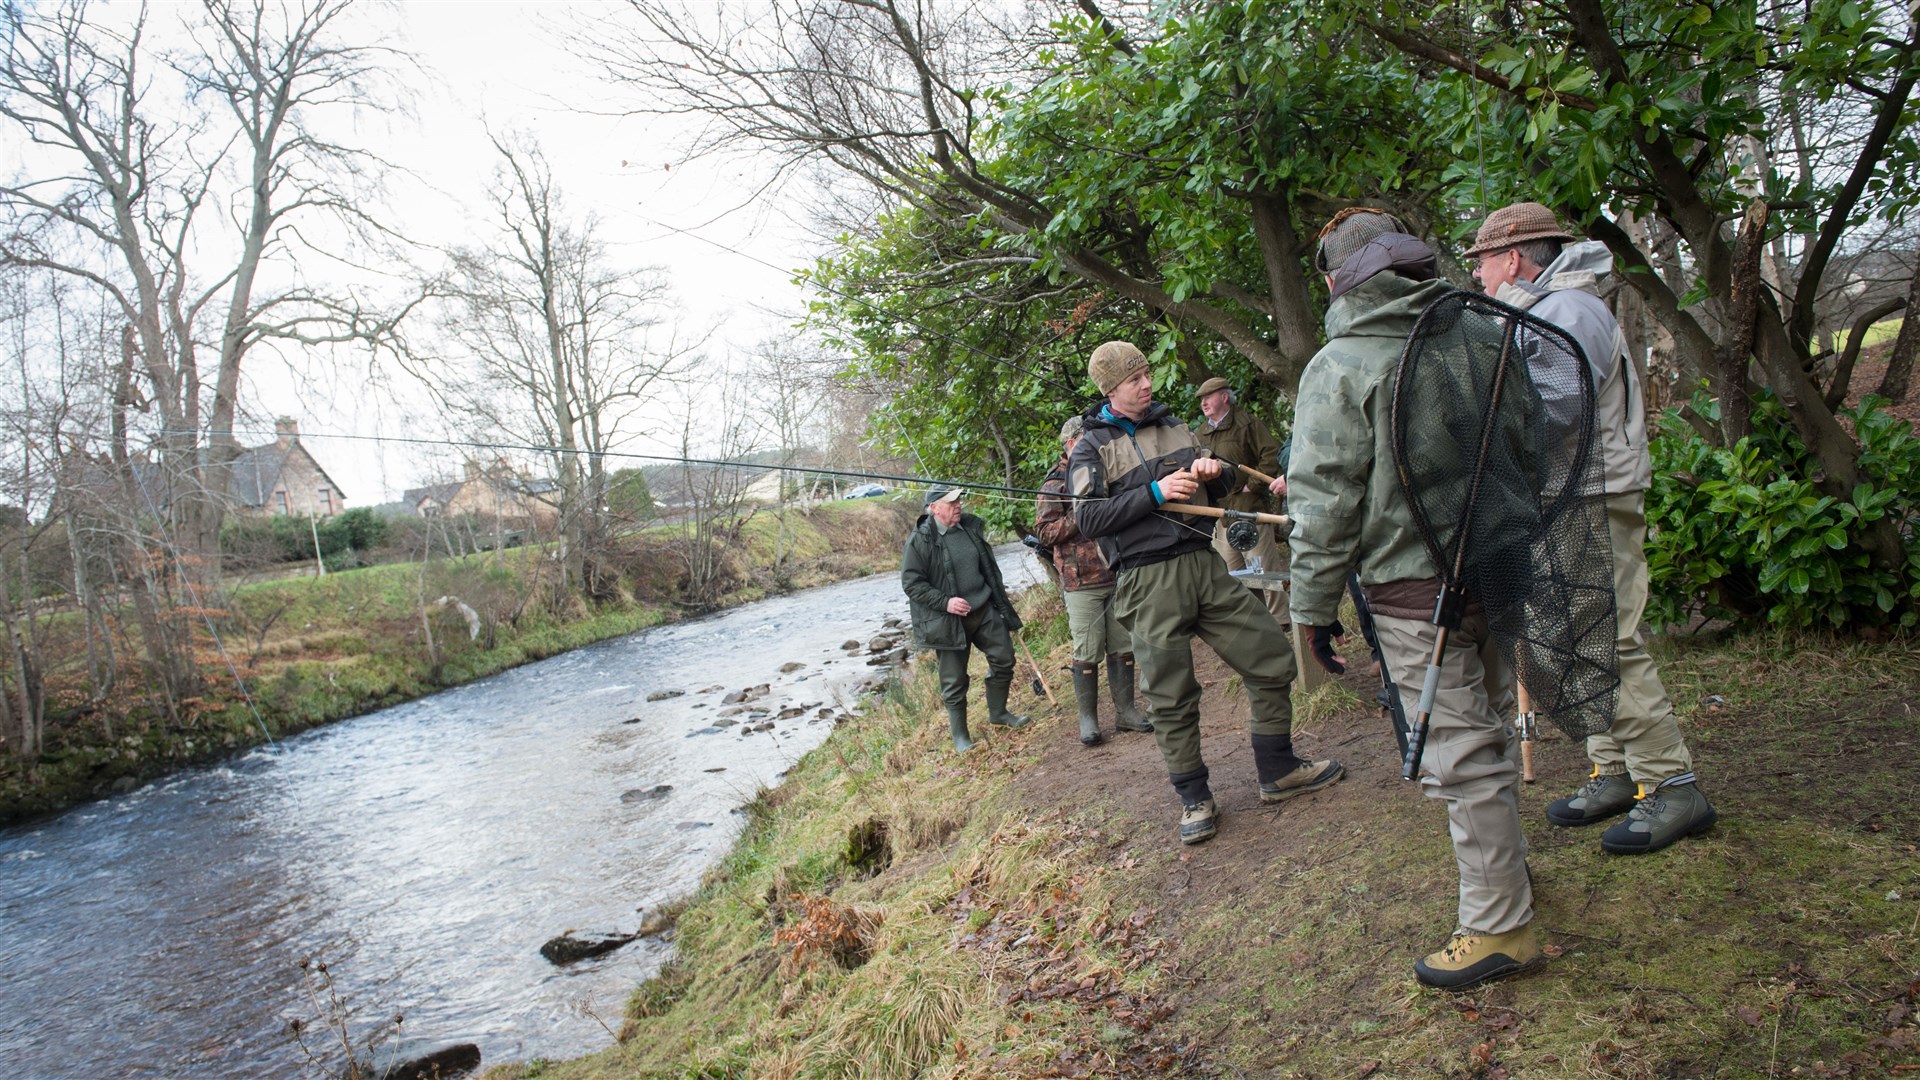 The opening of the Alness River by Alness Angling Club. ....Picture: Callum Mackay. Image No. 032498.